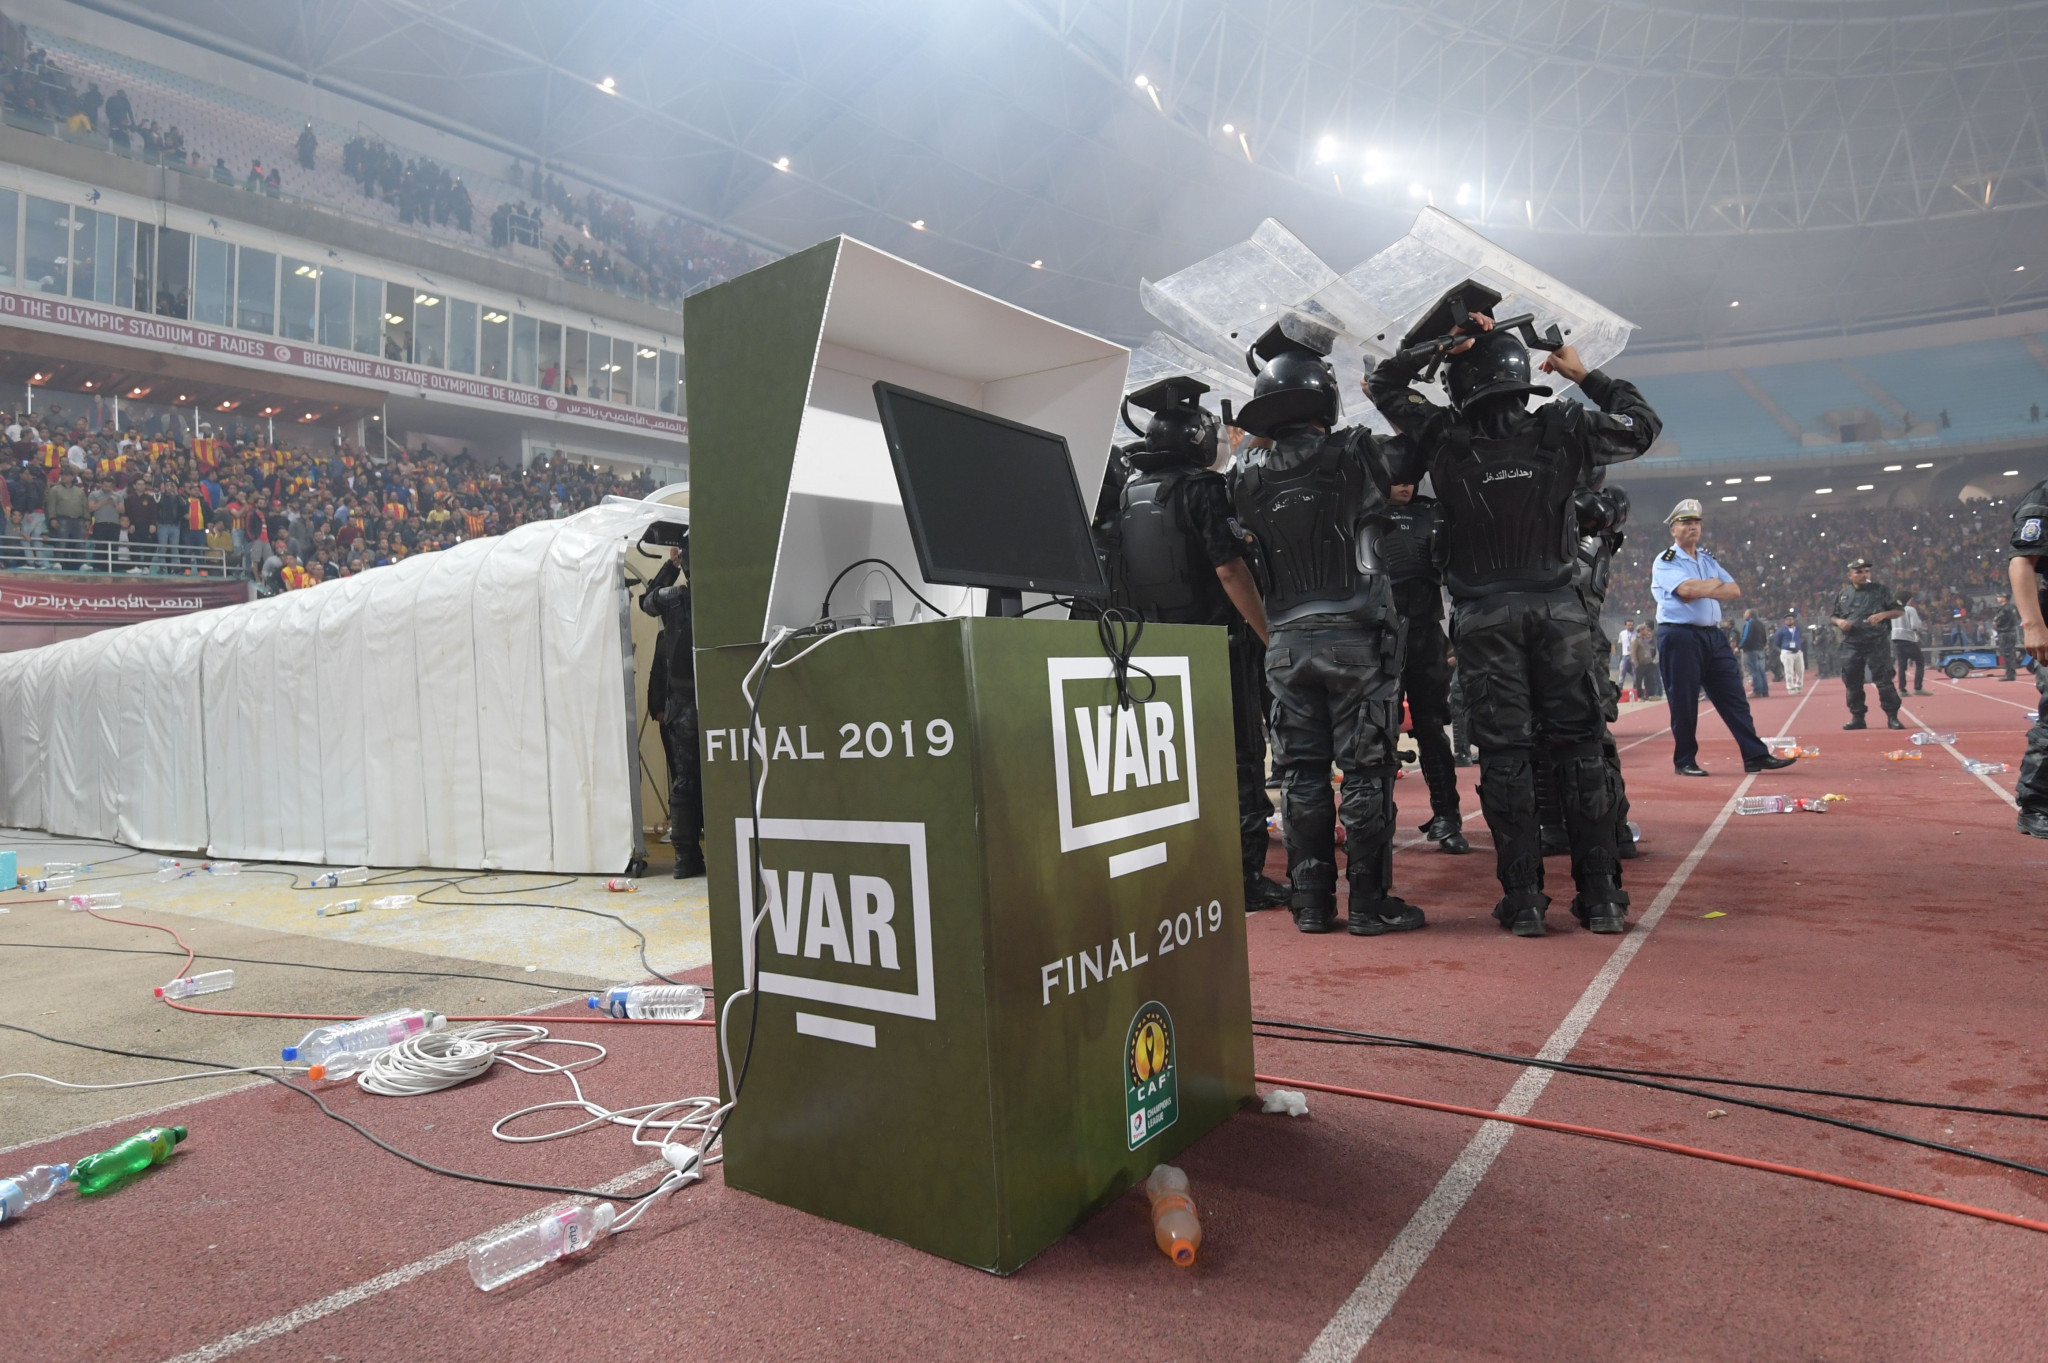 Reports claim the VAR system was unavailable due to a fault but the players had not been informed ©Getty Images